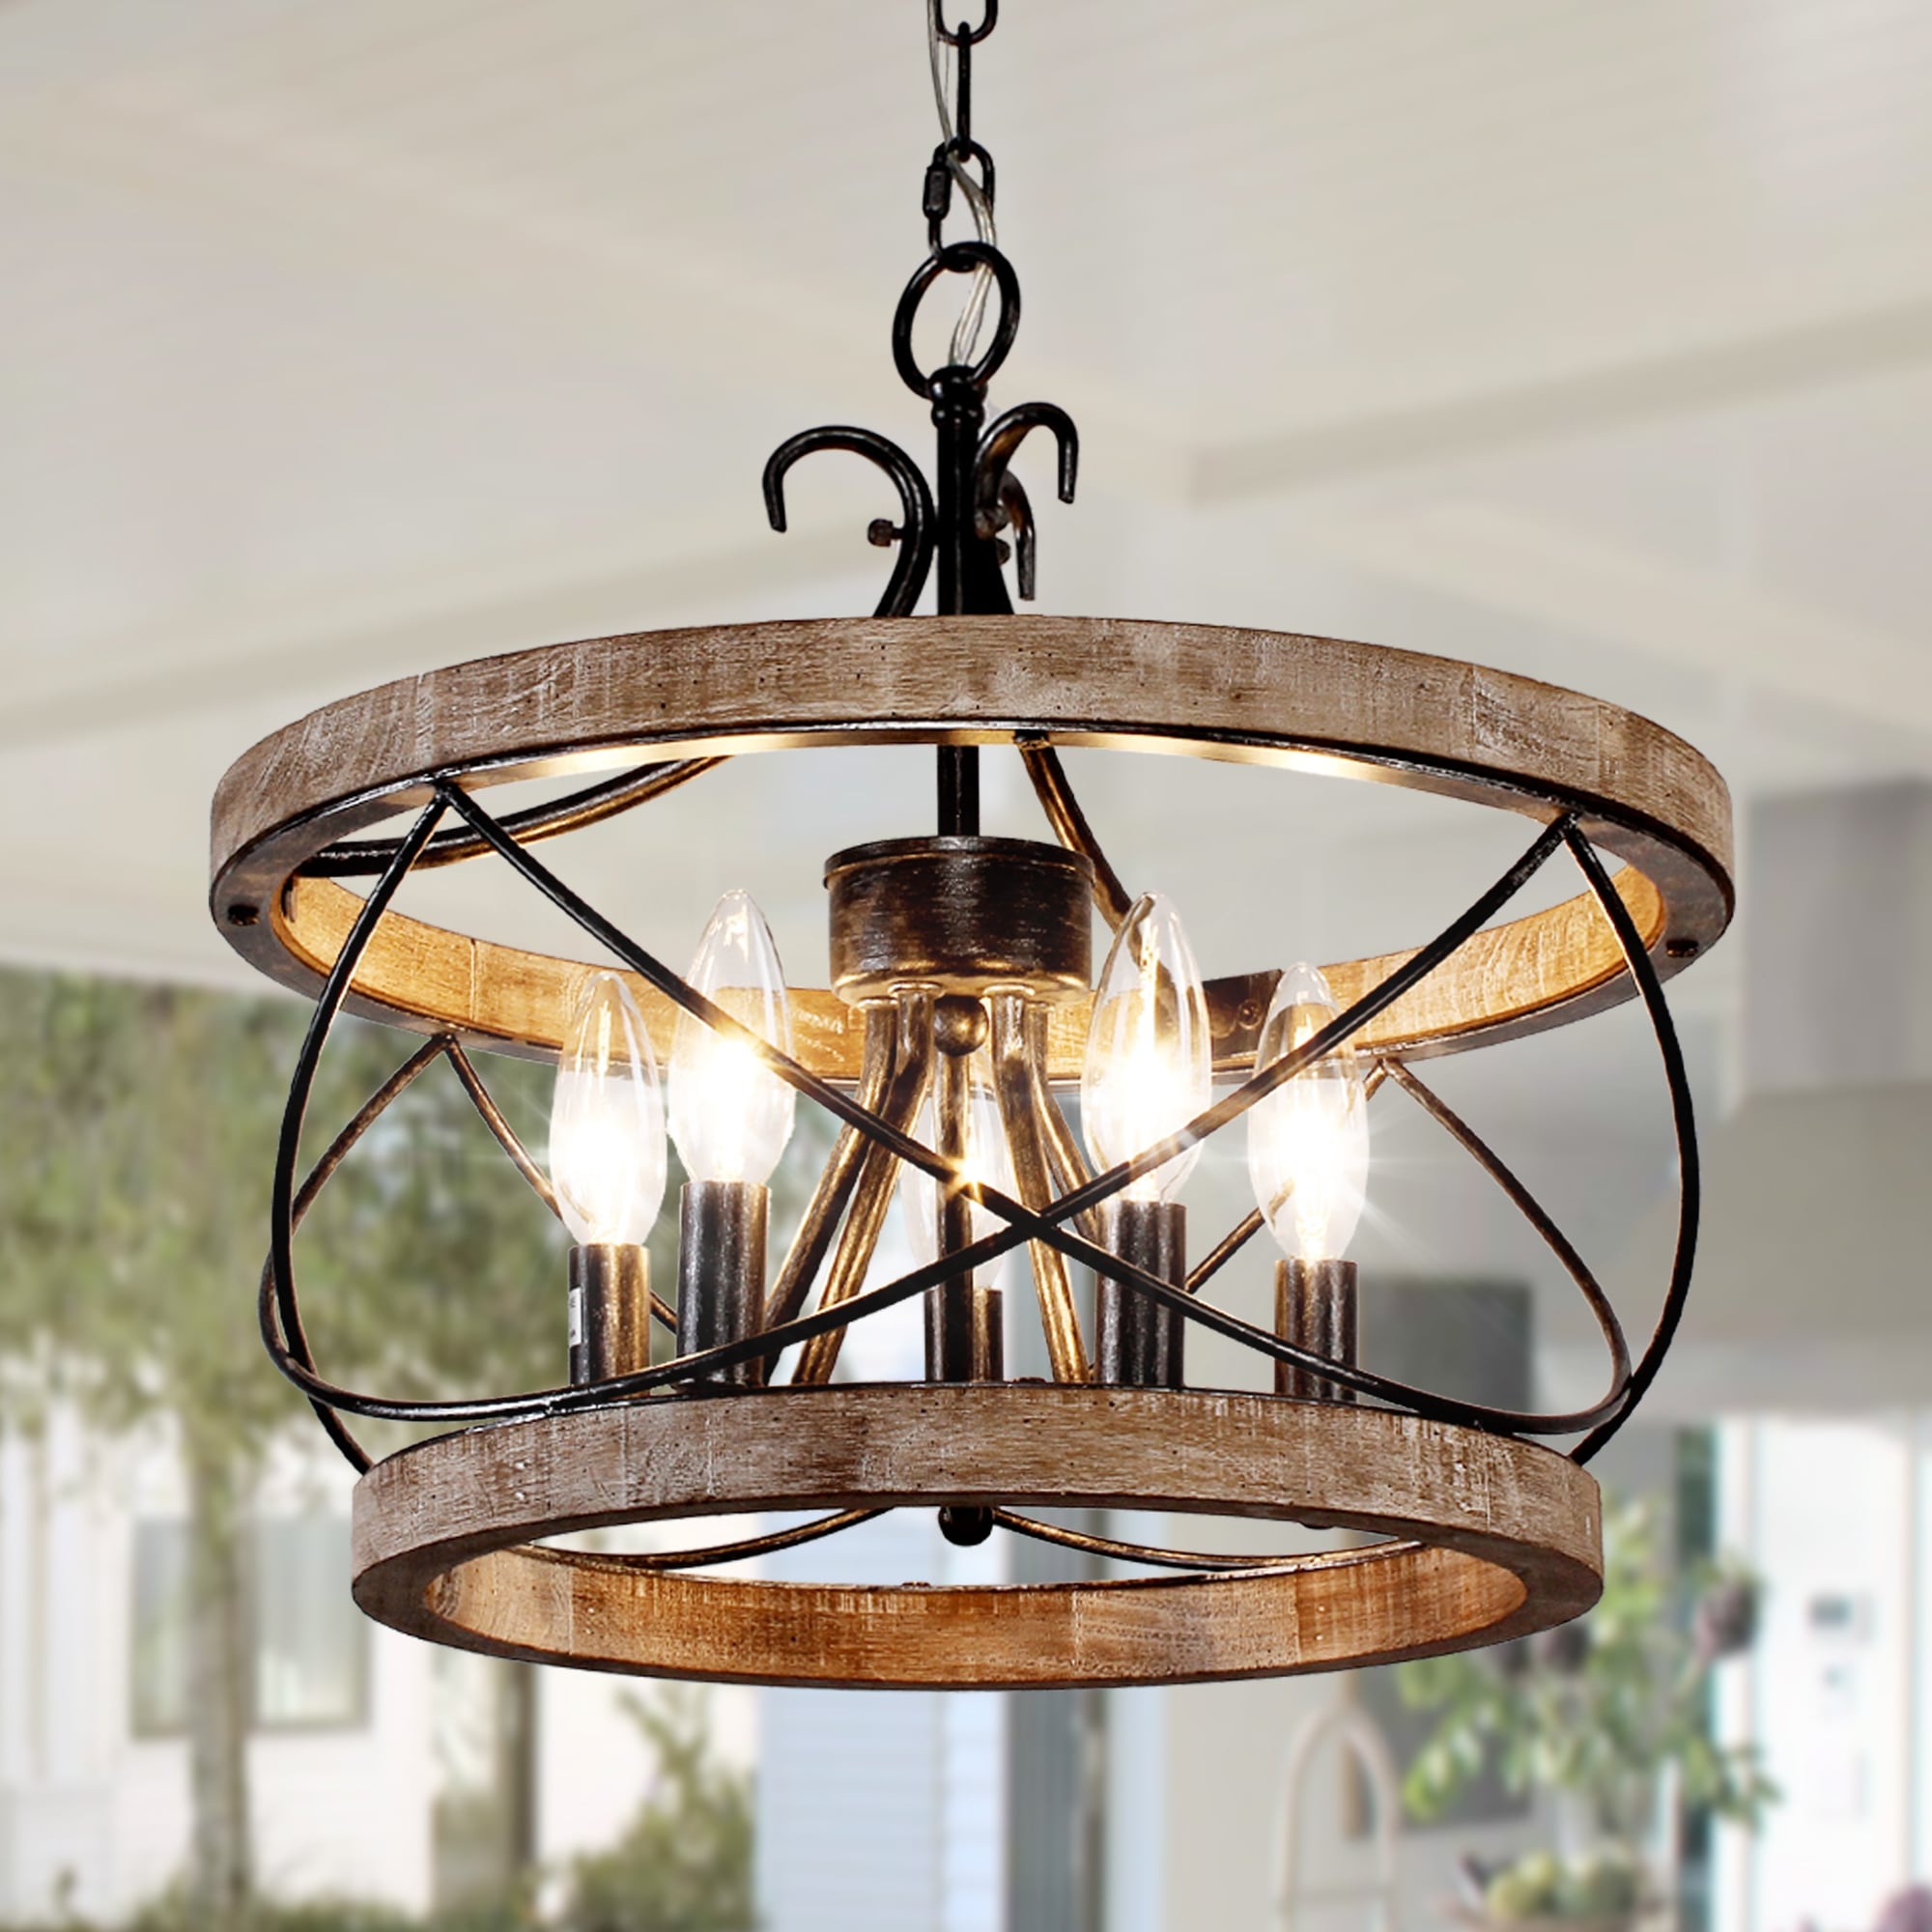 Cage Chandeliers - Bed Bath & Beyond